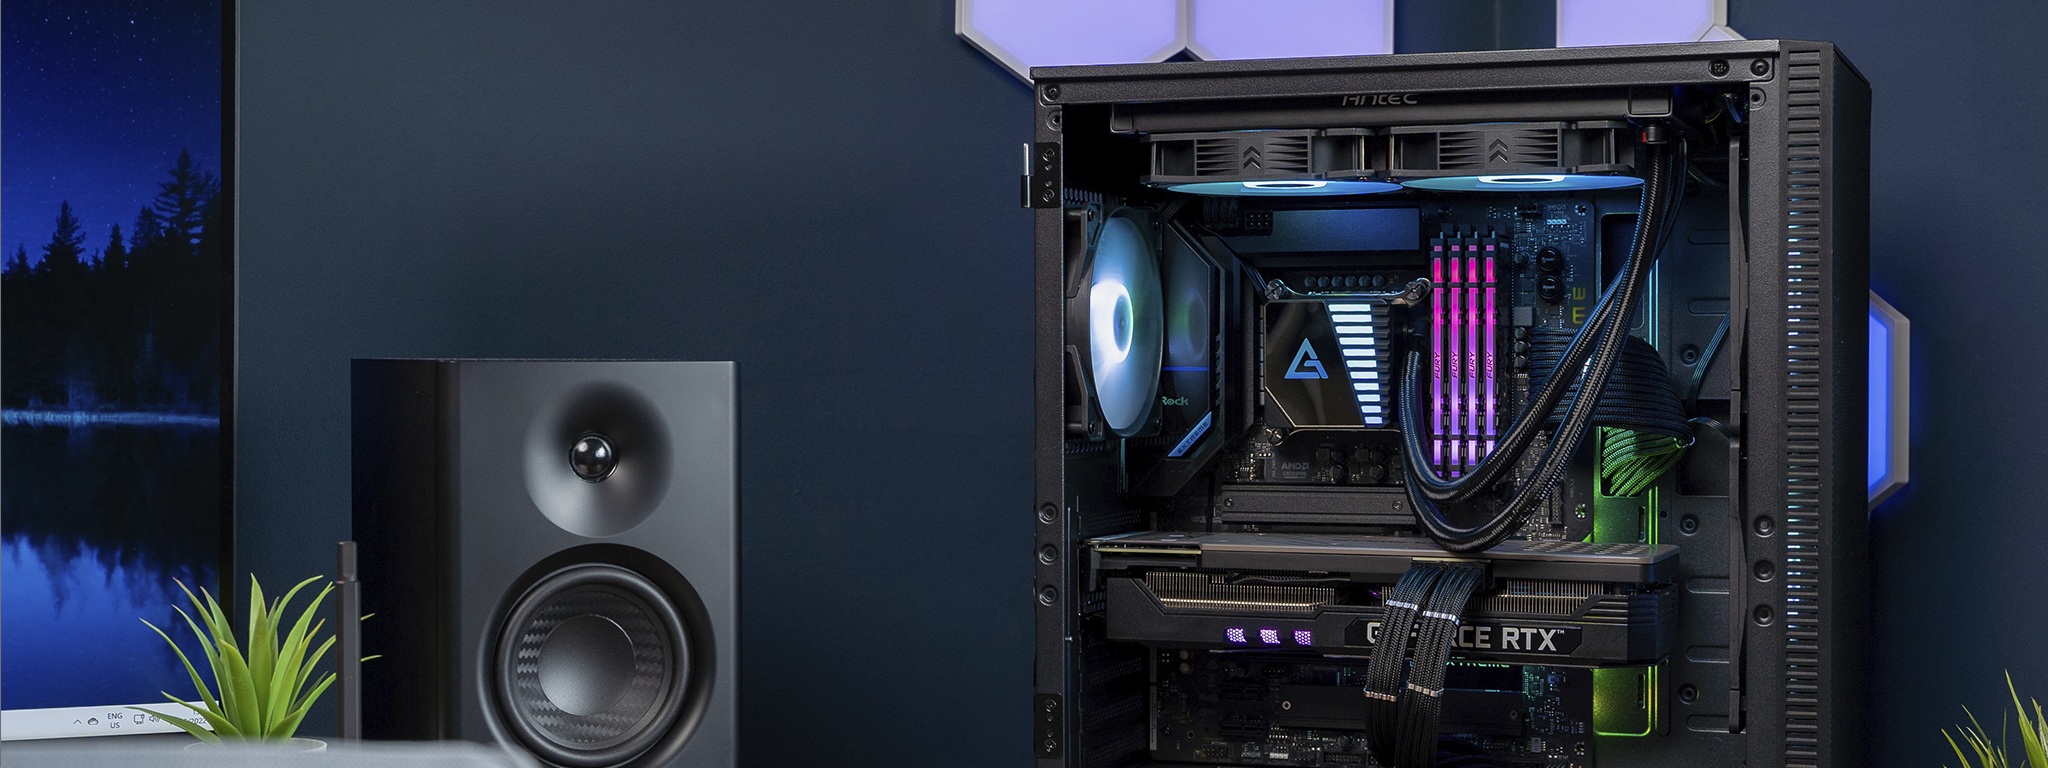 A gaming tower desktop with Kingston FURY Renegade DDR4 RGB and a liquid cooling system